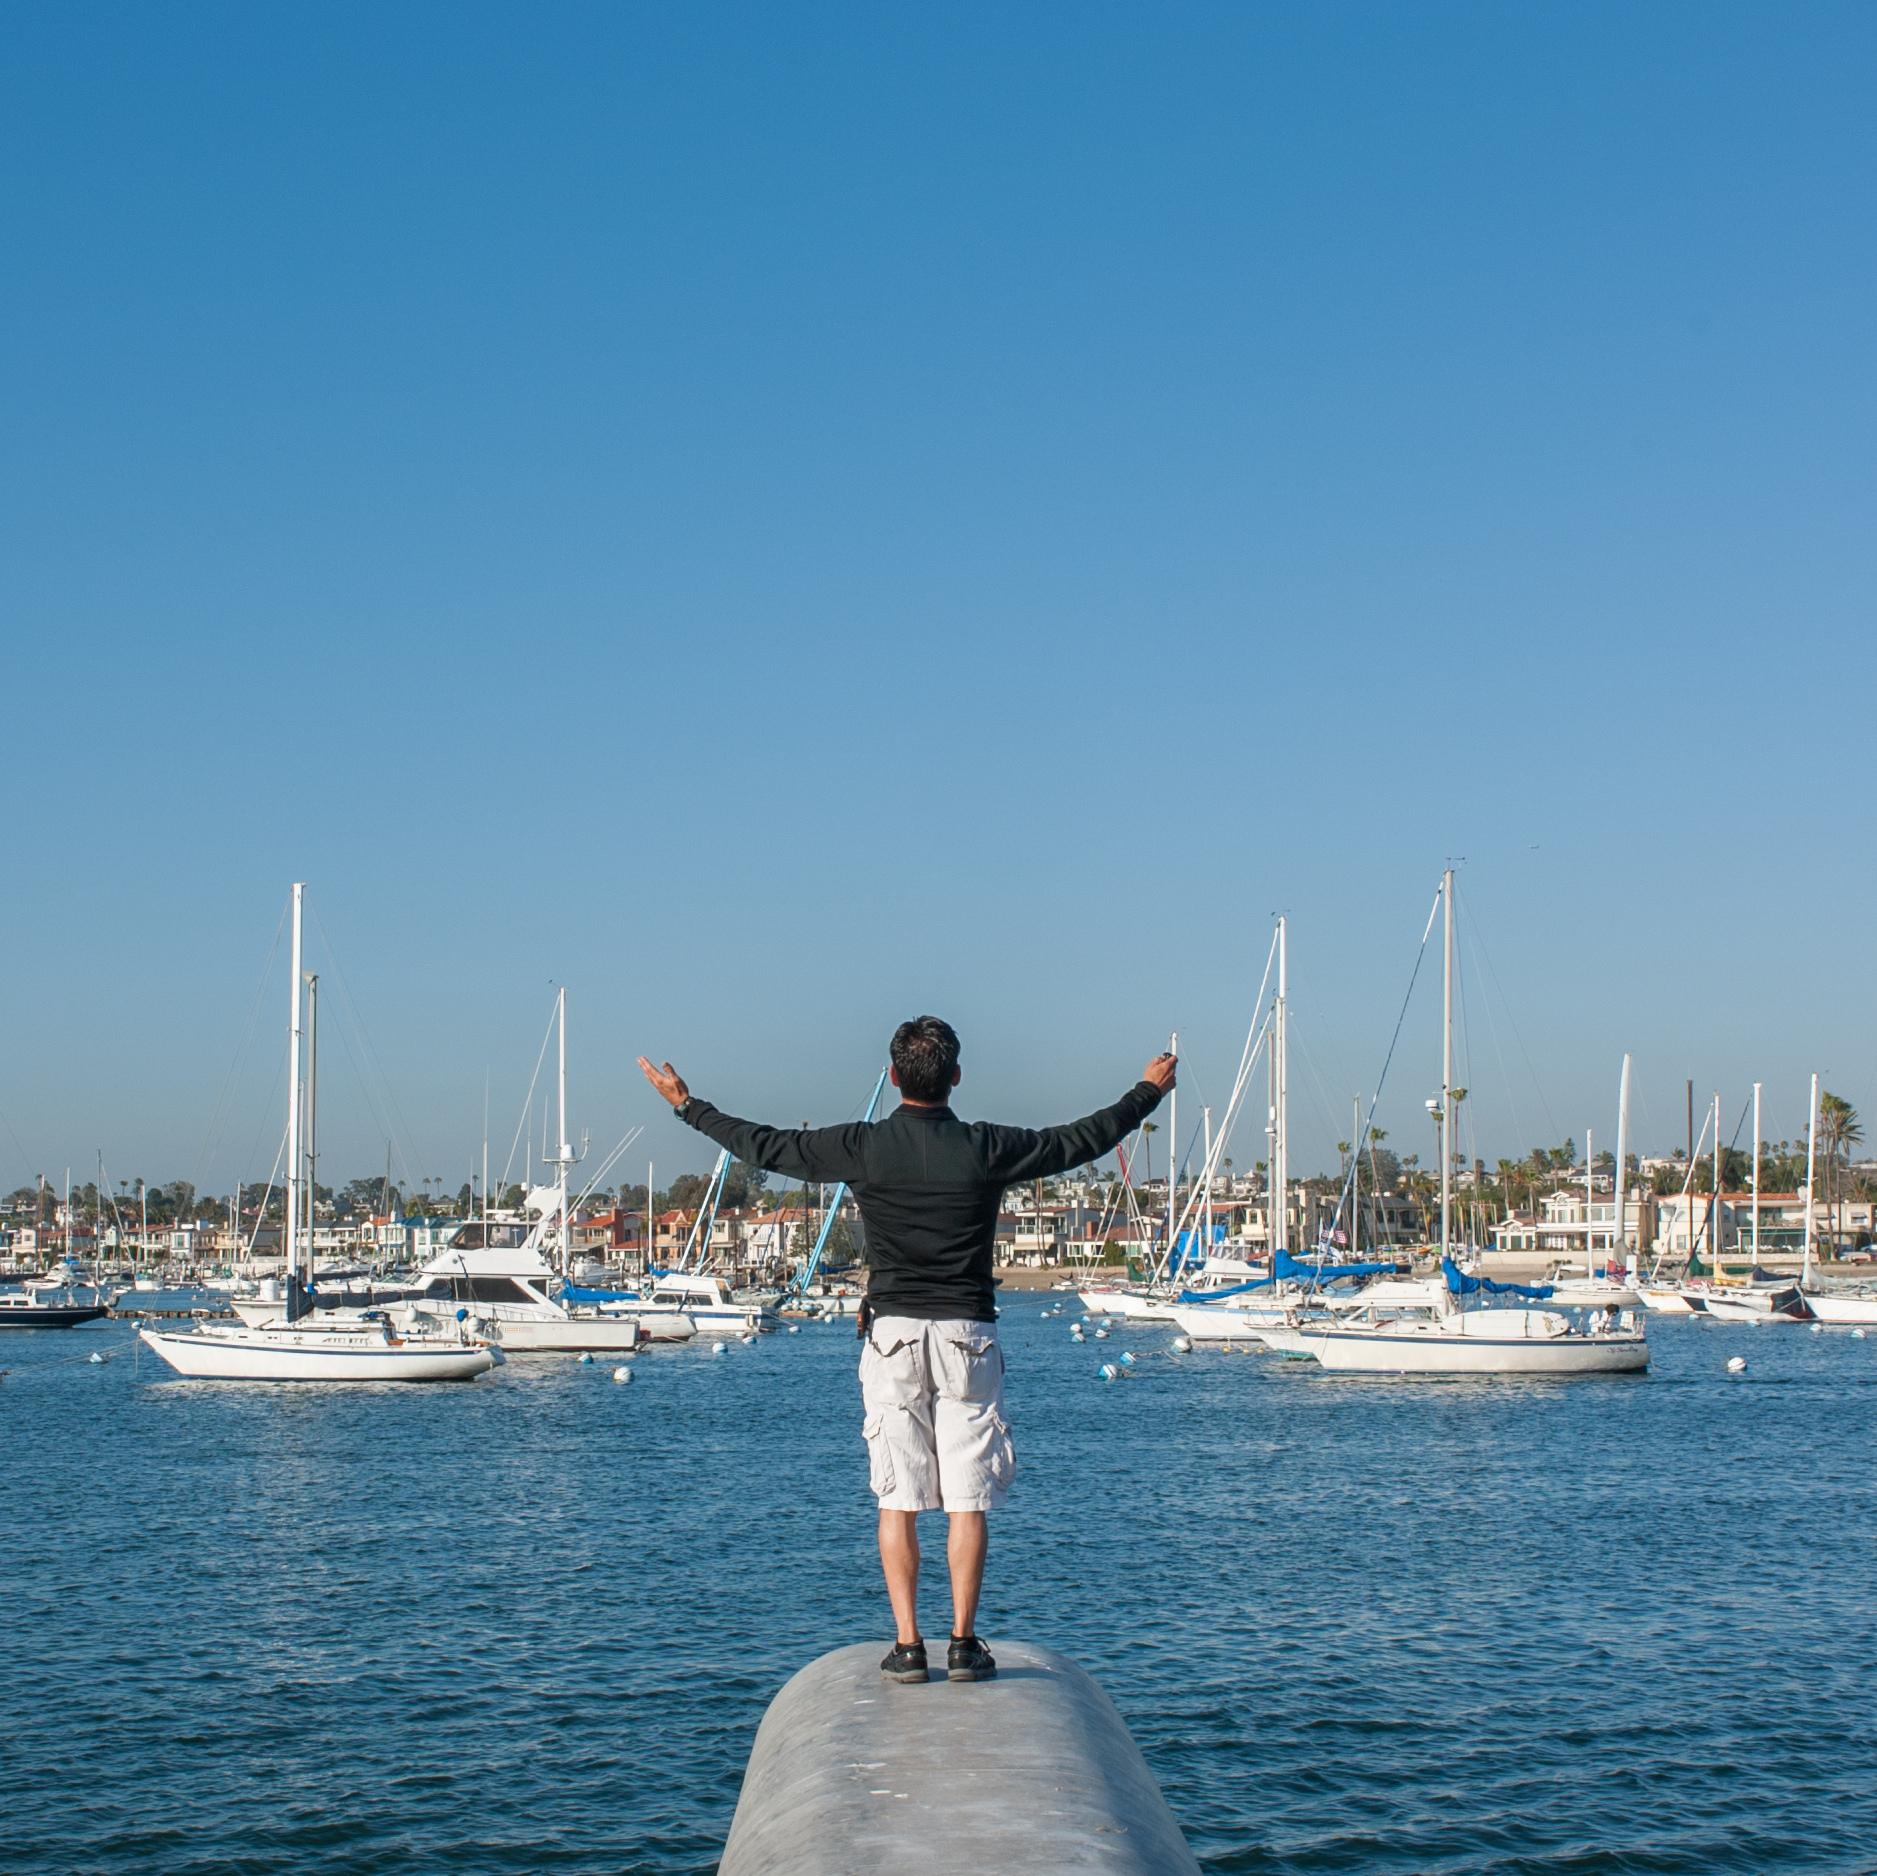 Man standing with arms outstretched on in front of a harbor with boats docked on a sunny day